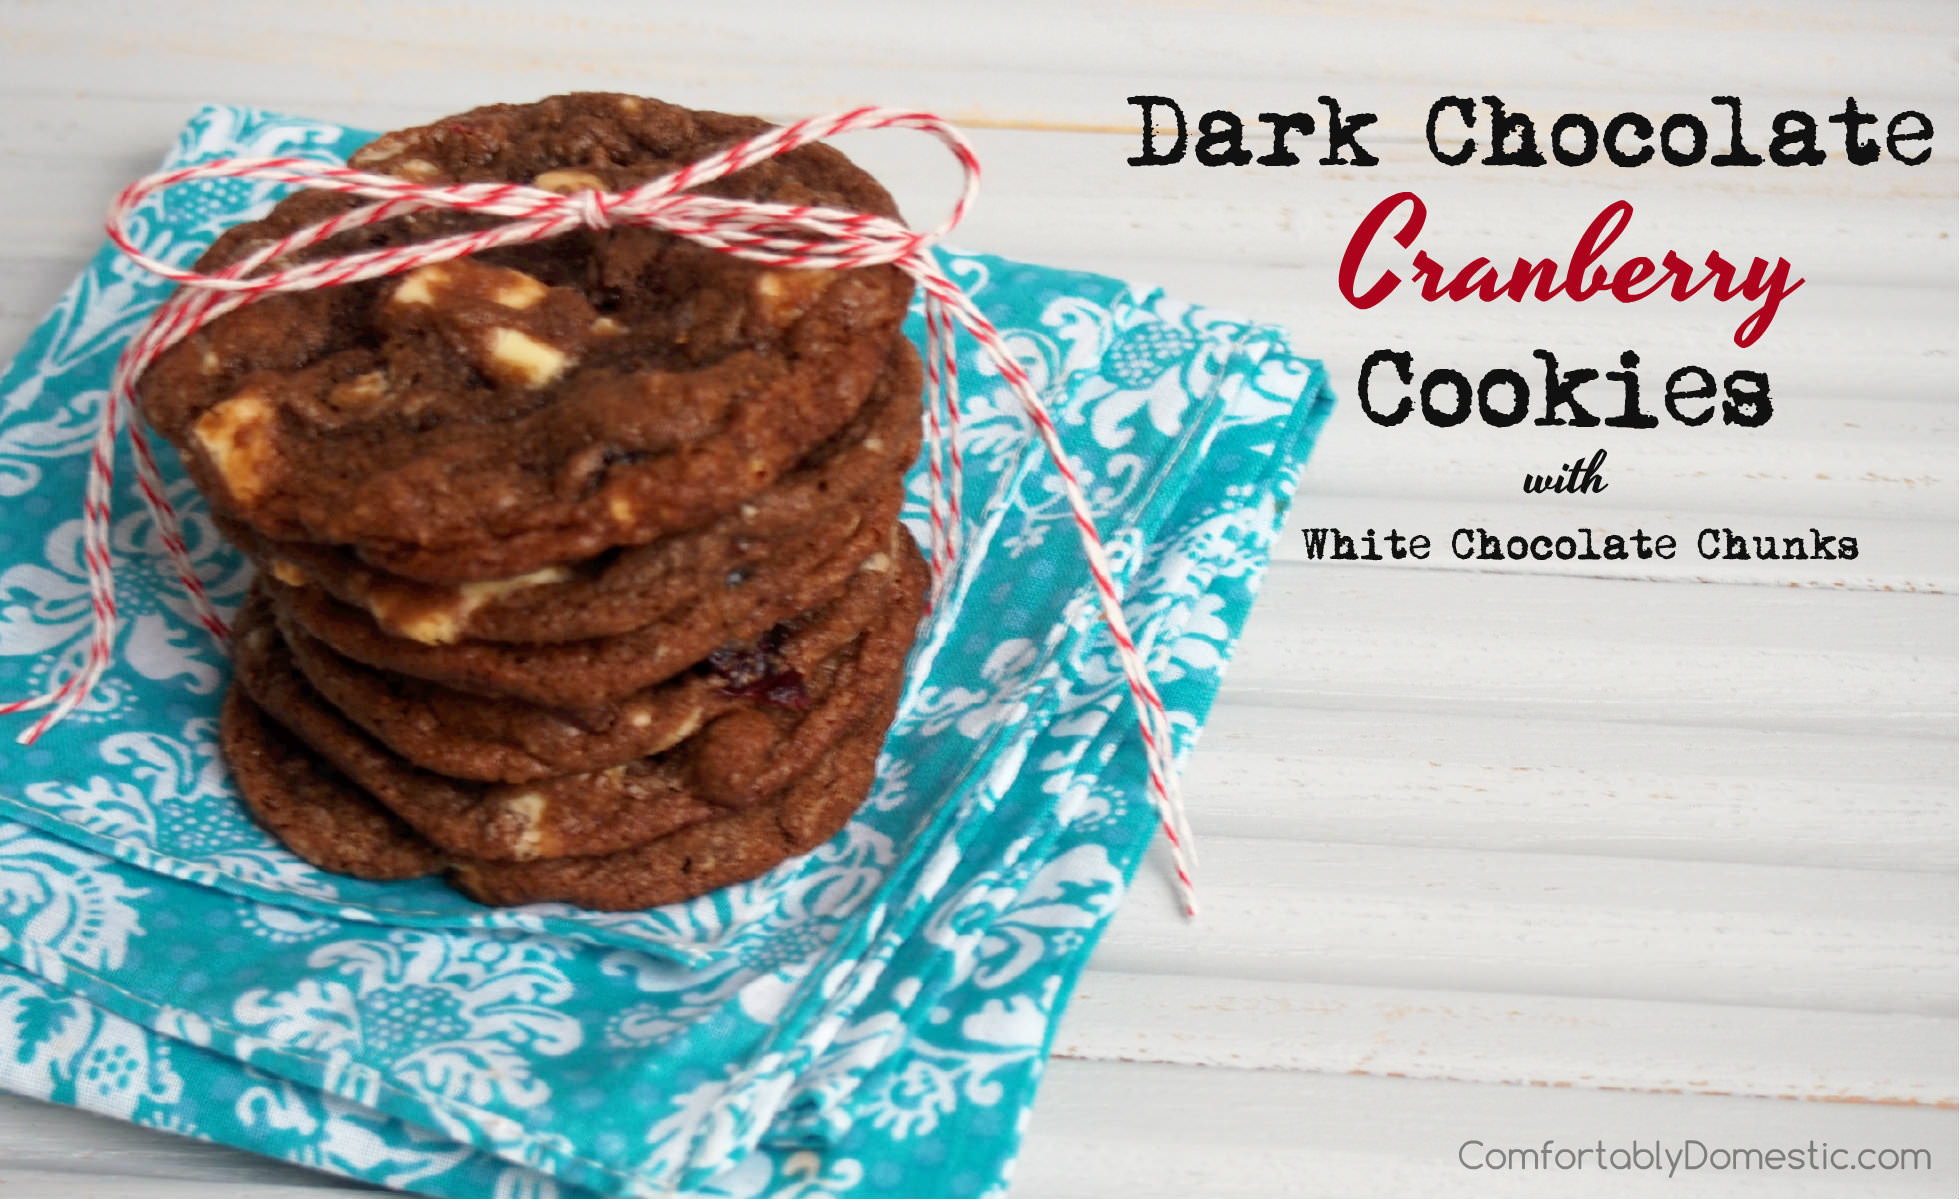 Dark Chocolate Cranberry Cookies with White Chocolate Chunks | ComfortablyDomestic.com are a rich chocolate cookie that crisp yet soft, loaded with tangy cranberries and smooth white chocolate.